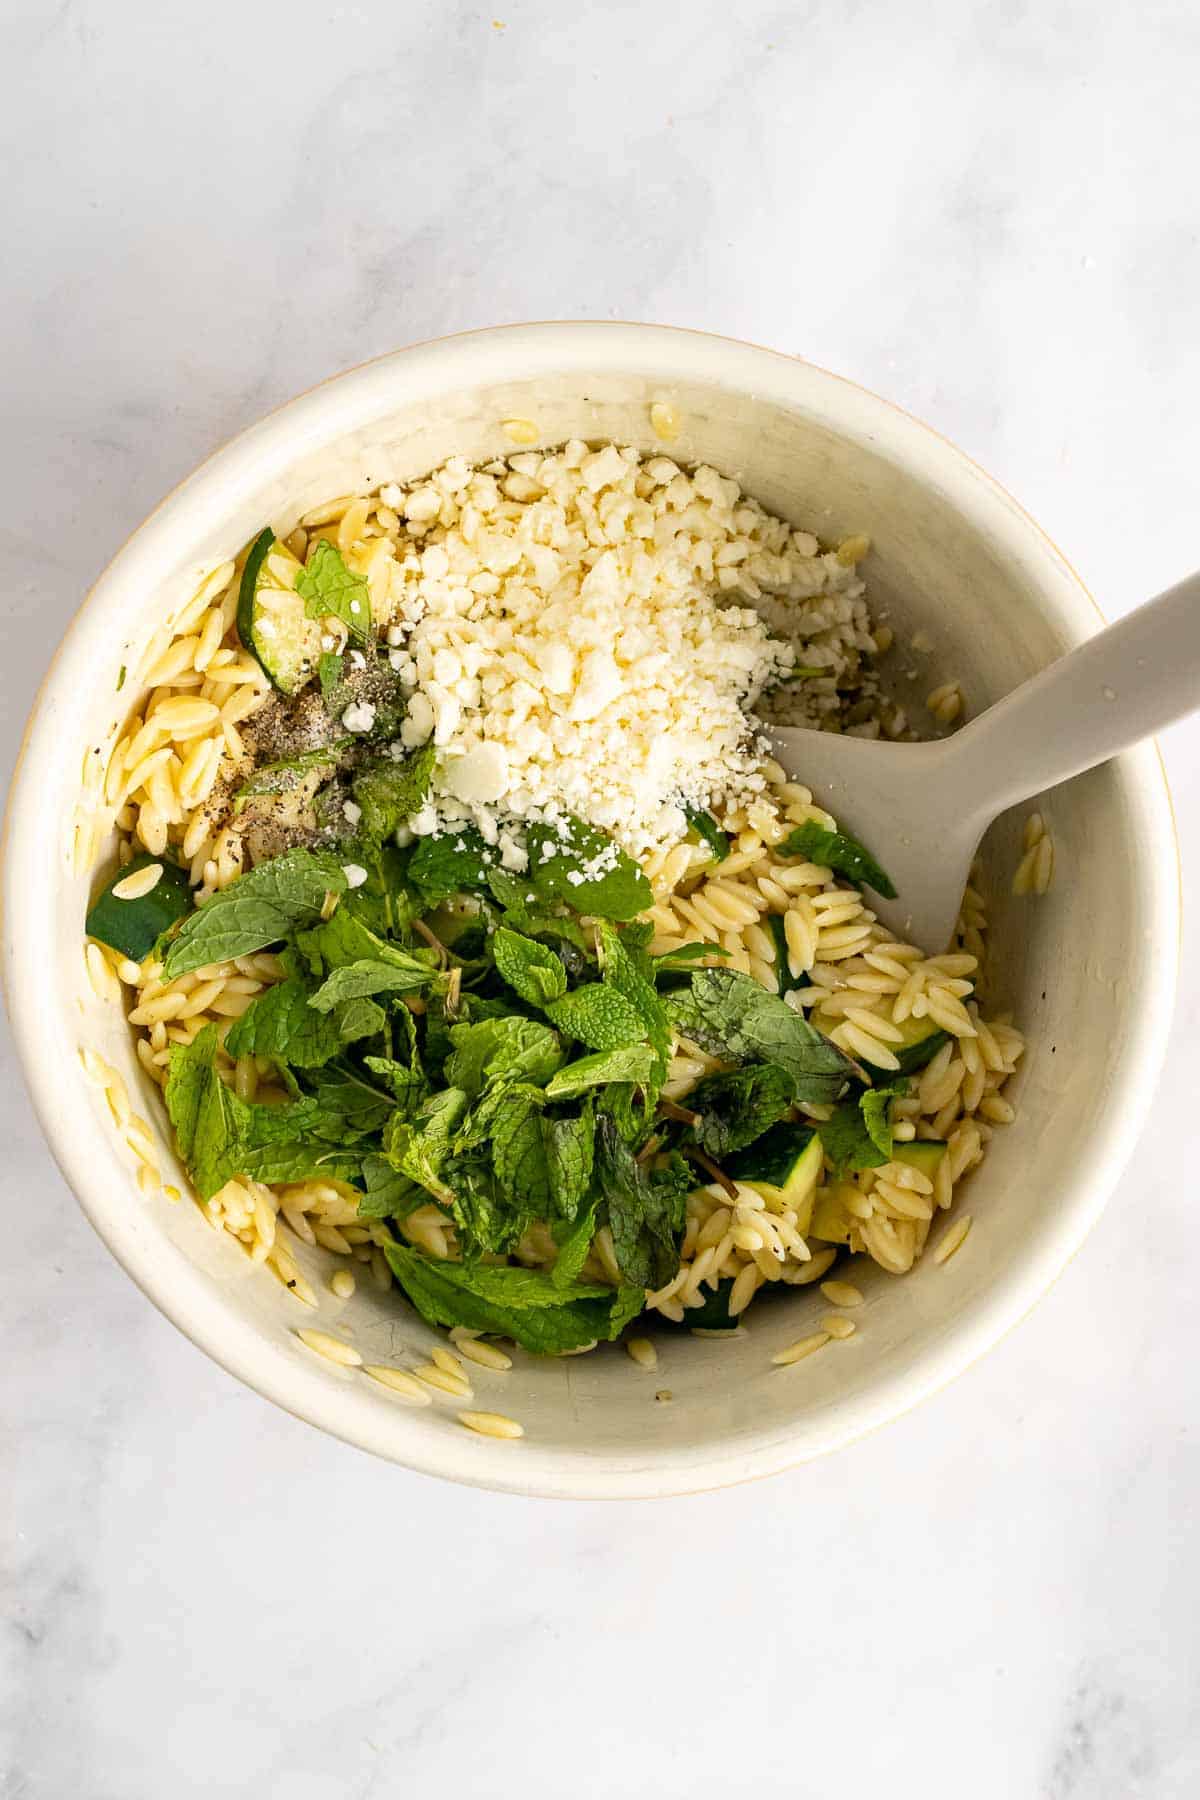 Bowl of orzo zucchini salad with faeta and mint on top